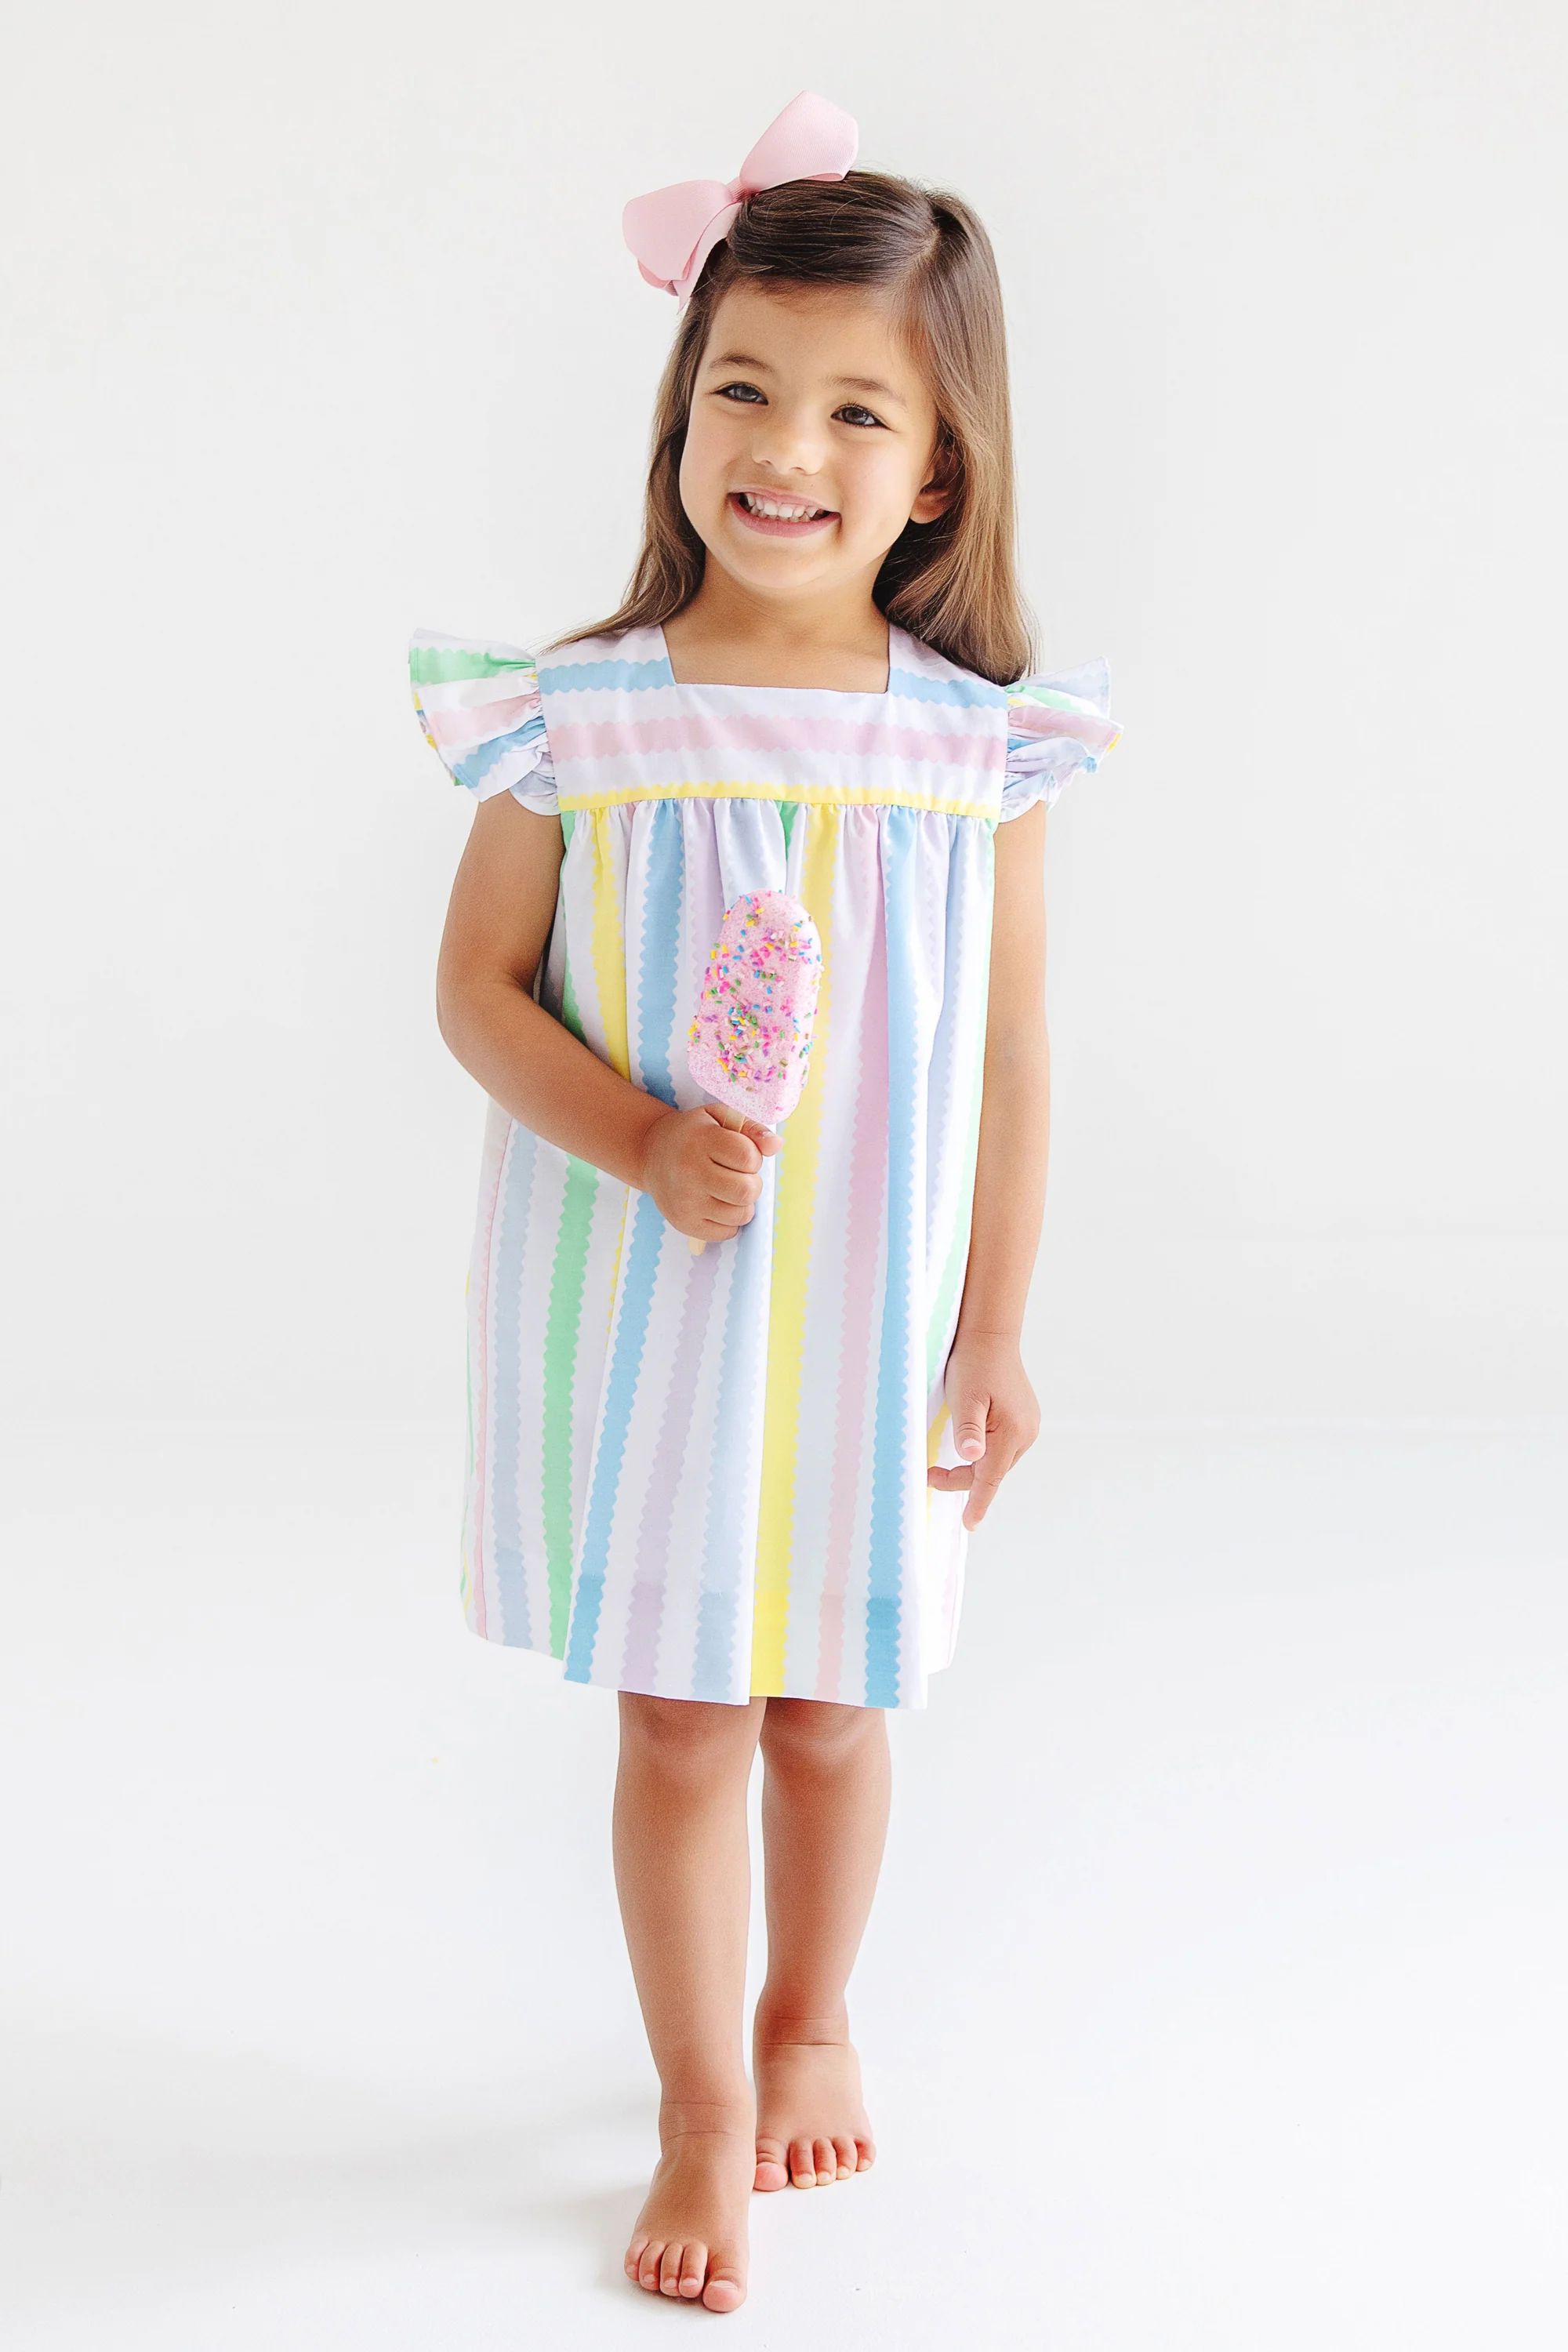 Rosemary Ruffle Dress - Wellington Wiggle Stripe with Pier Party Pink | The Beaufort Bonnet Company